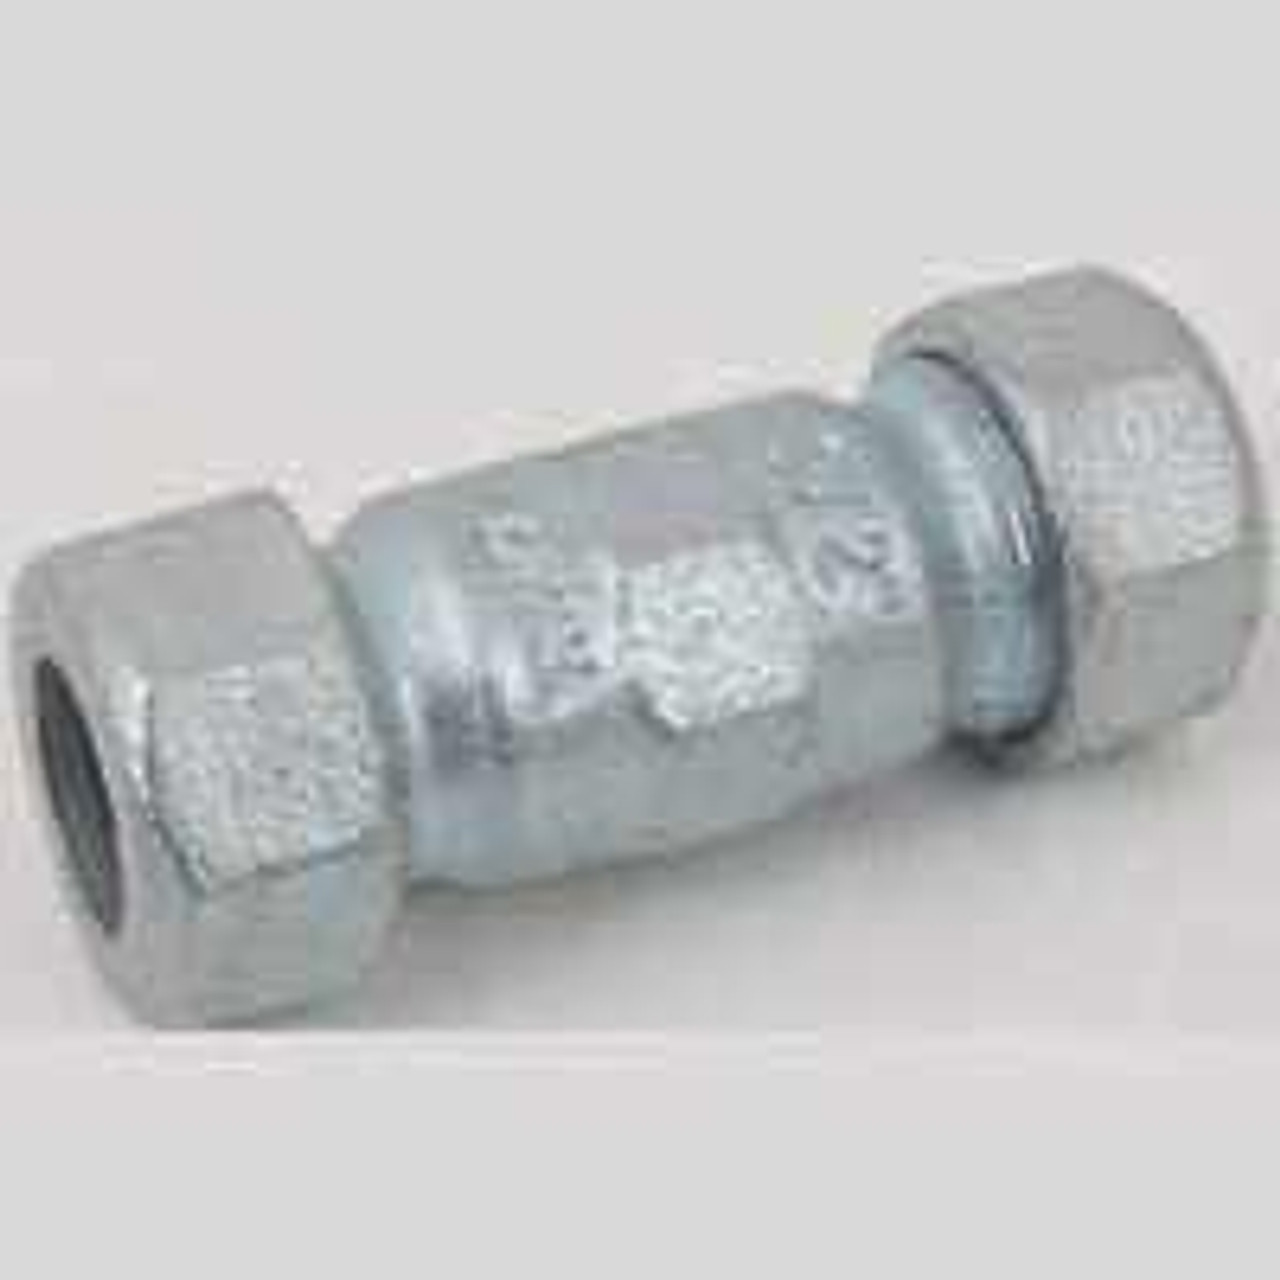 Black Pipe Fittings 2 Dresser Coupling Galvanized Surry